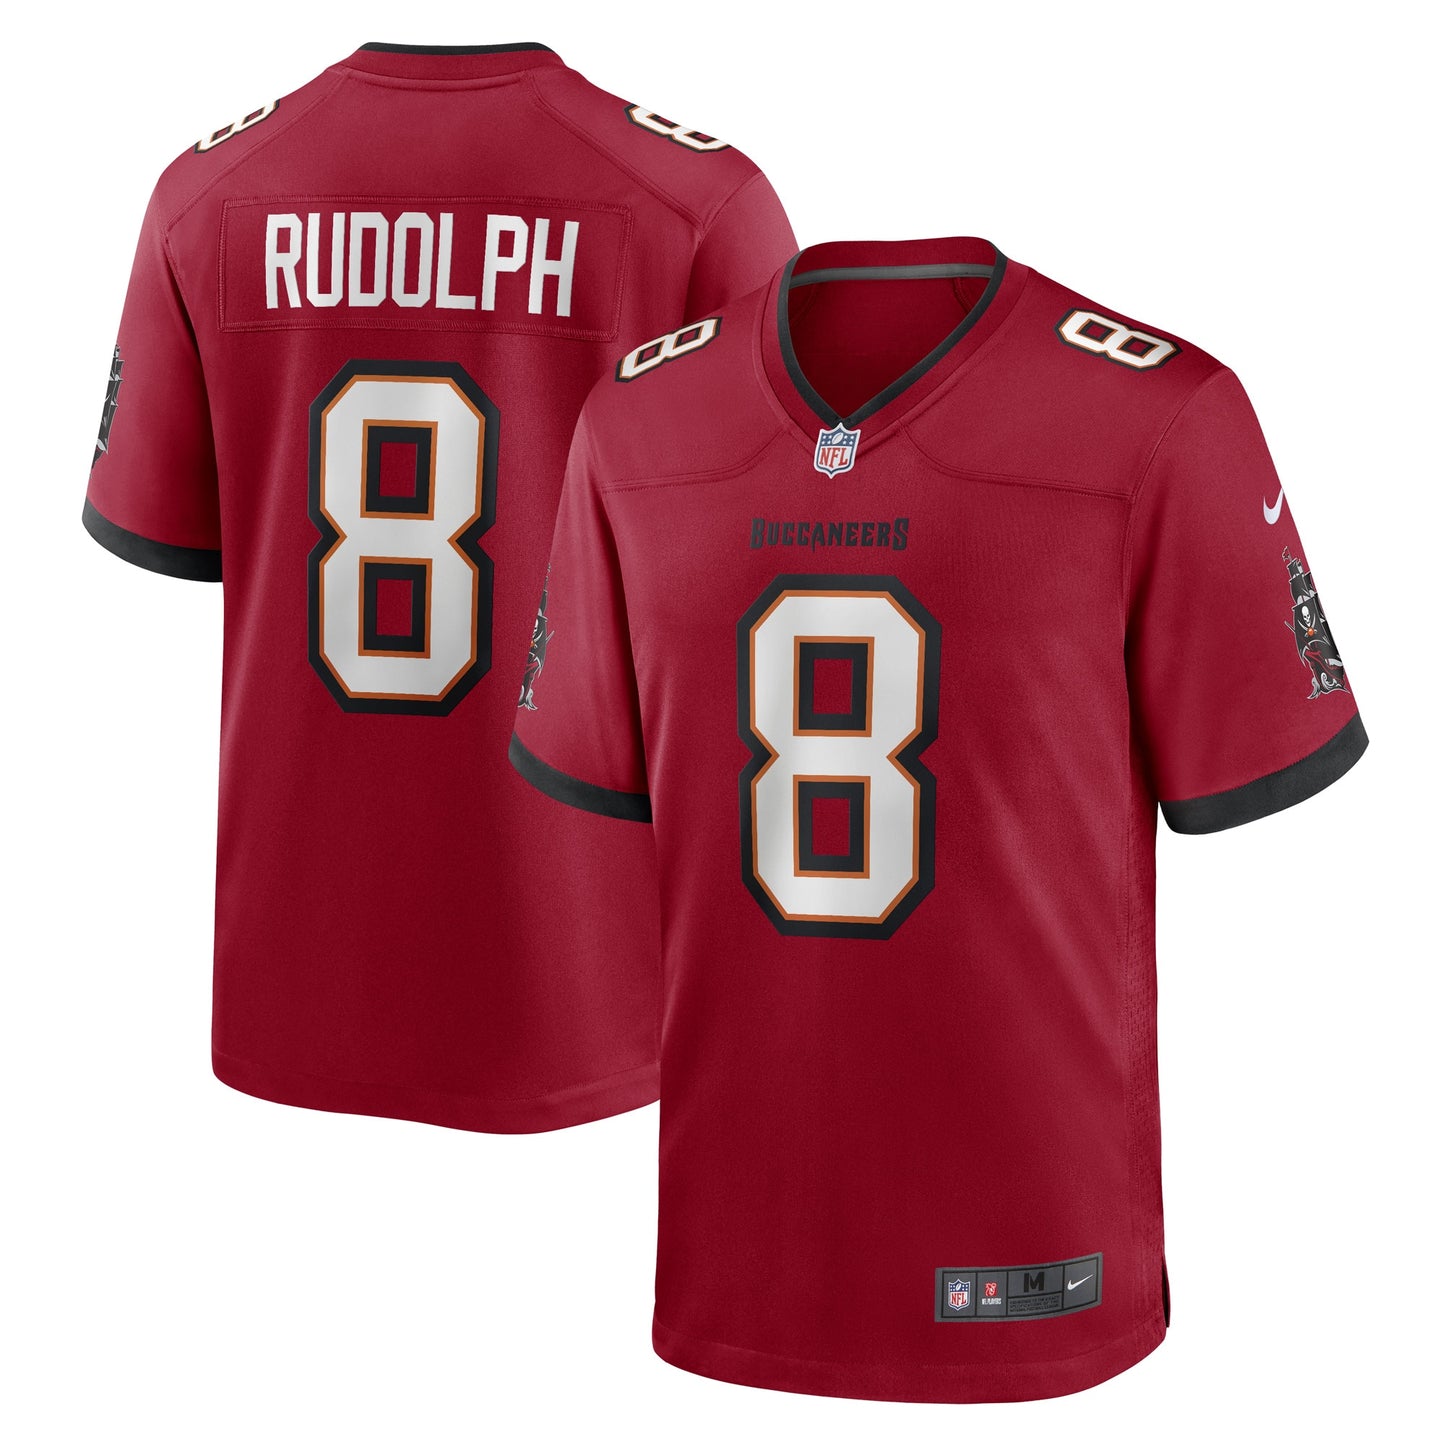 Kyle Rudolph Tampa Bay Buccaneers Nike Game Player Jersey - Red